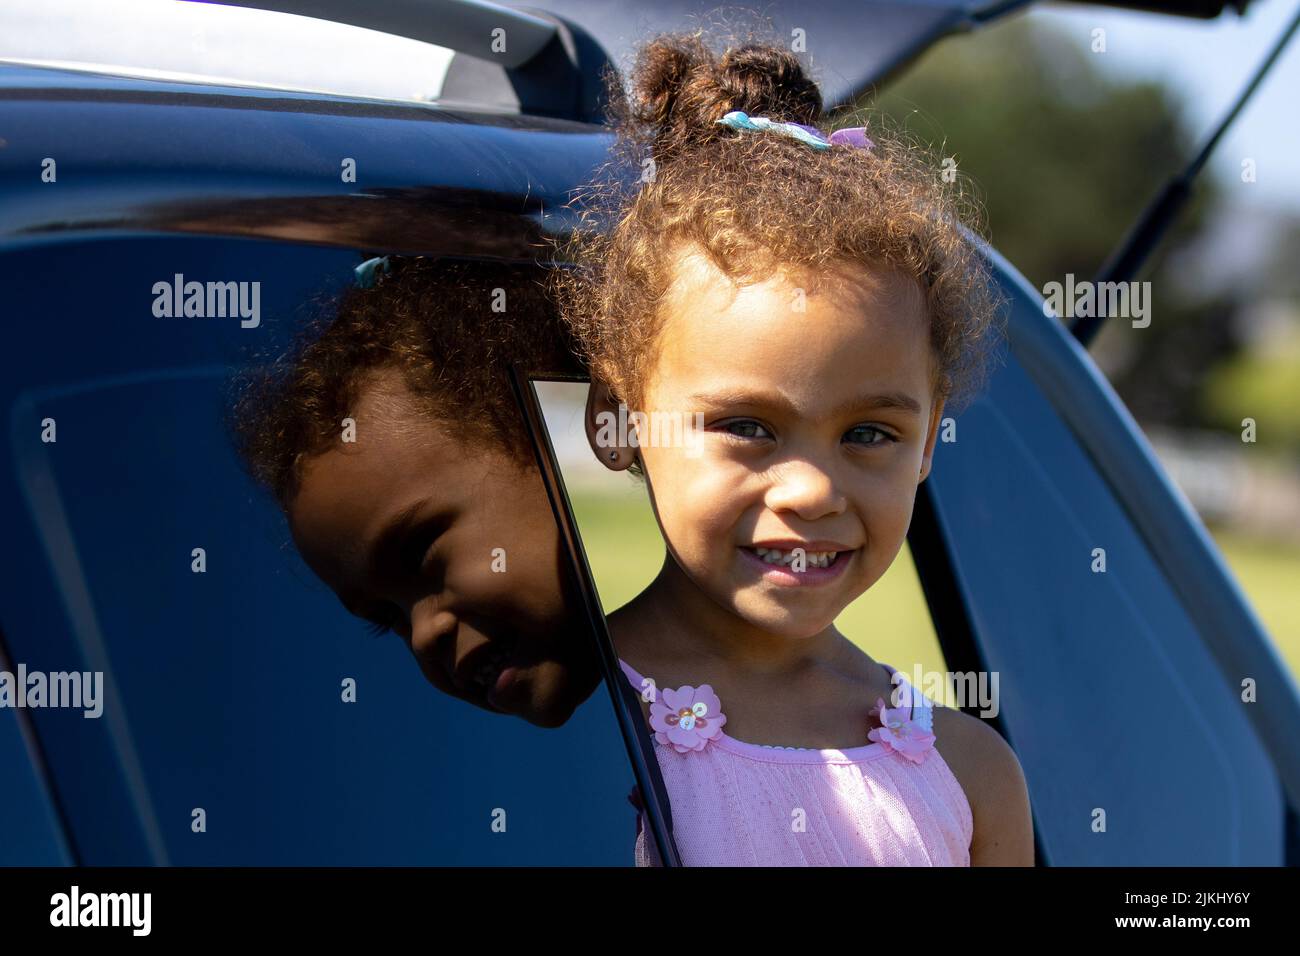 A closeup shot of an African smiling girl reflecting on car window glass on a sunny day Stock Photo